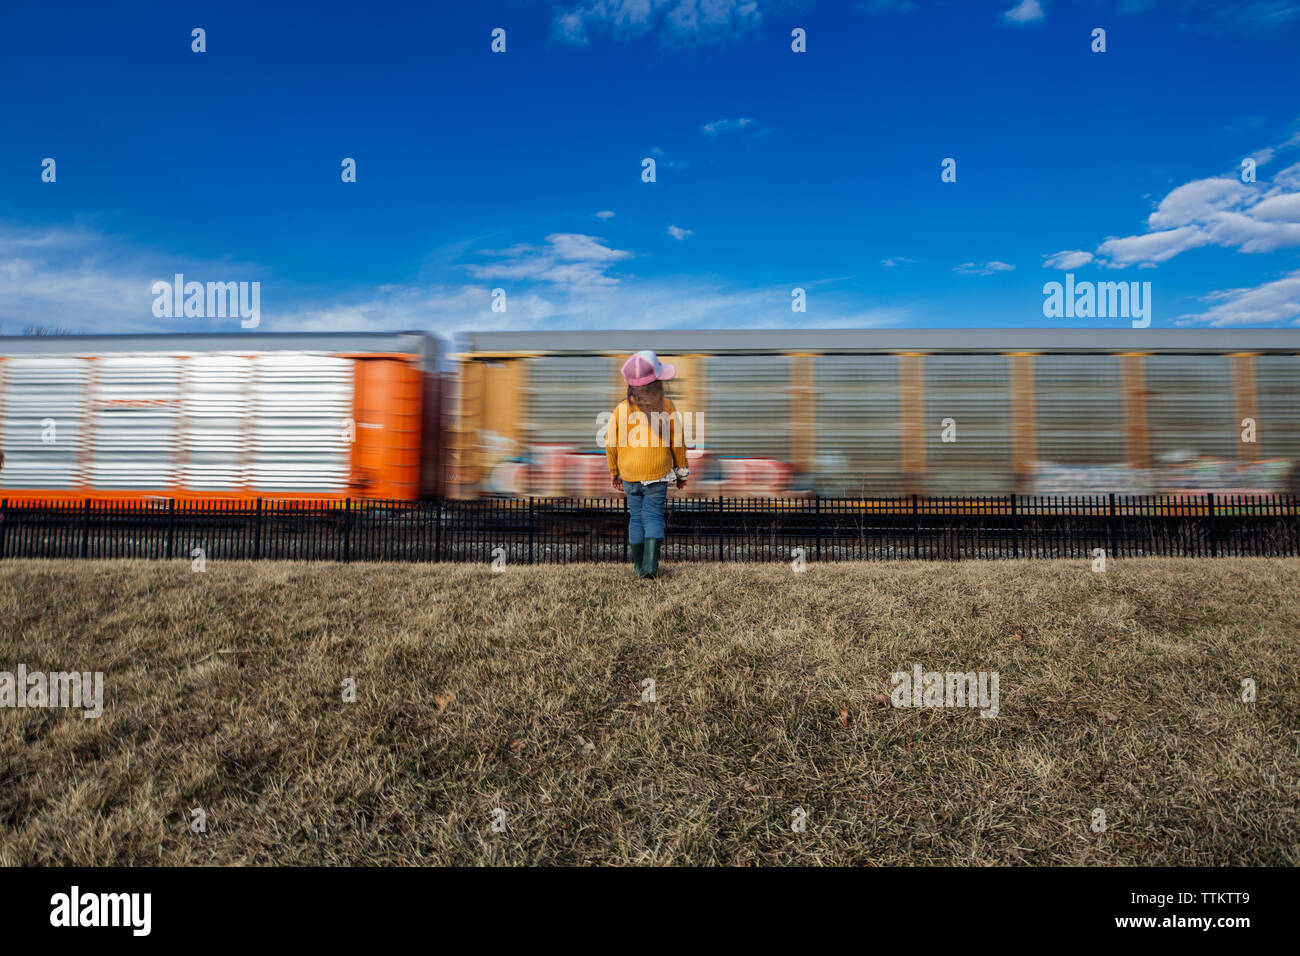 Child standing next to train with a beautiful blue sky Stock Photo